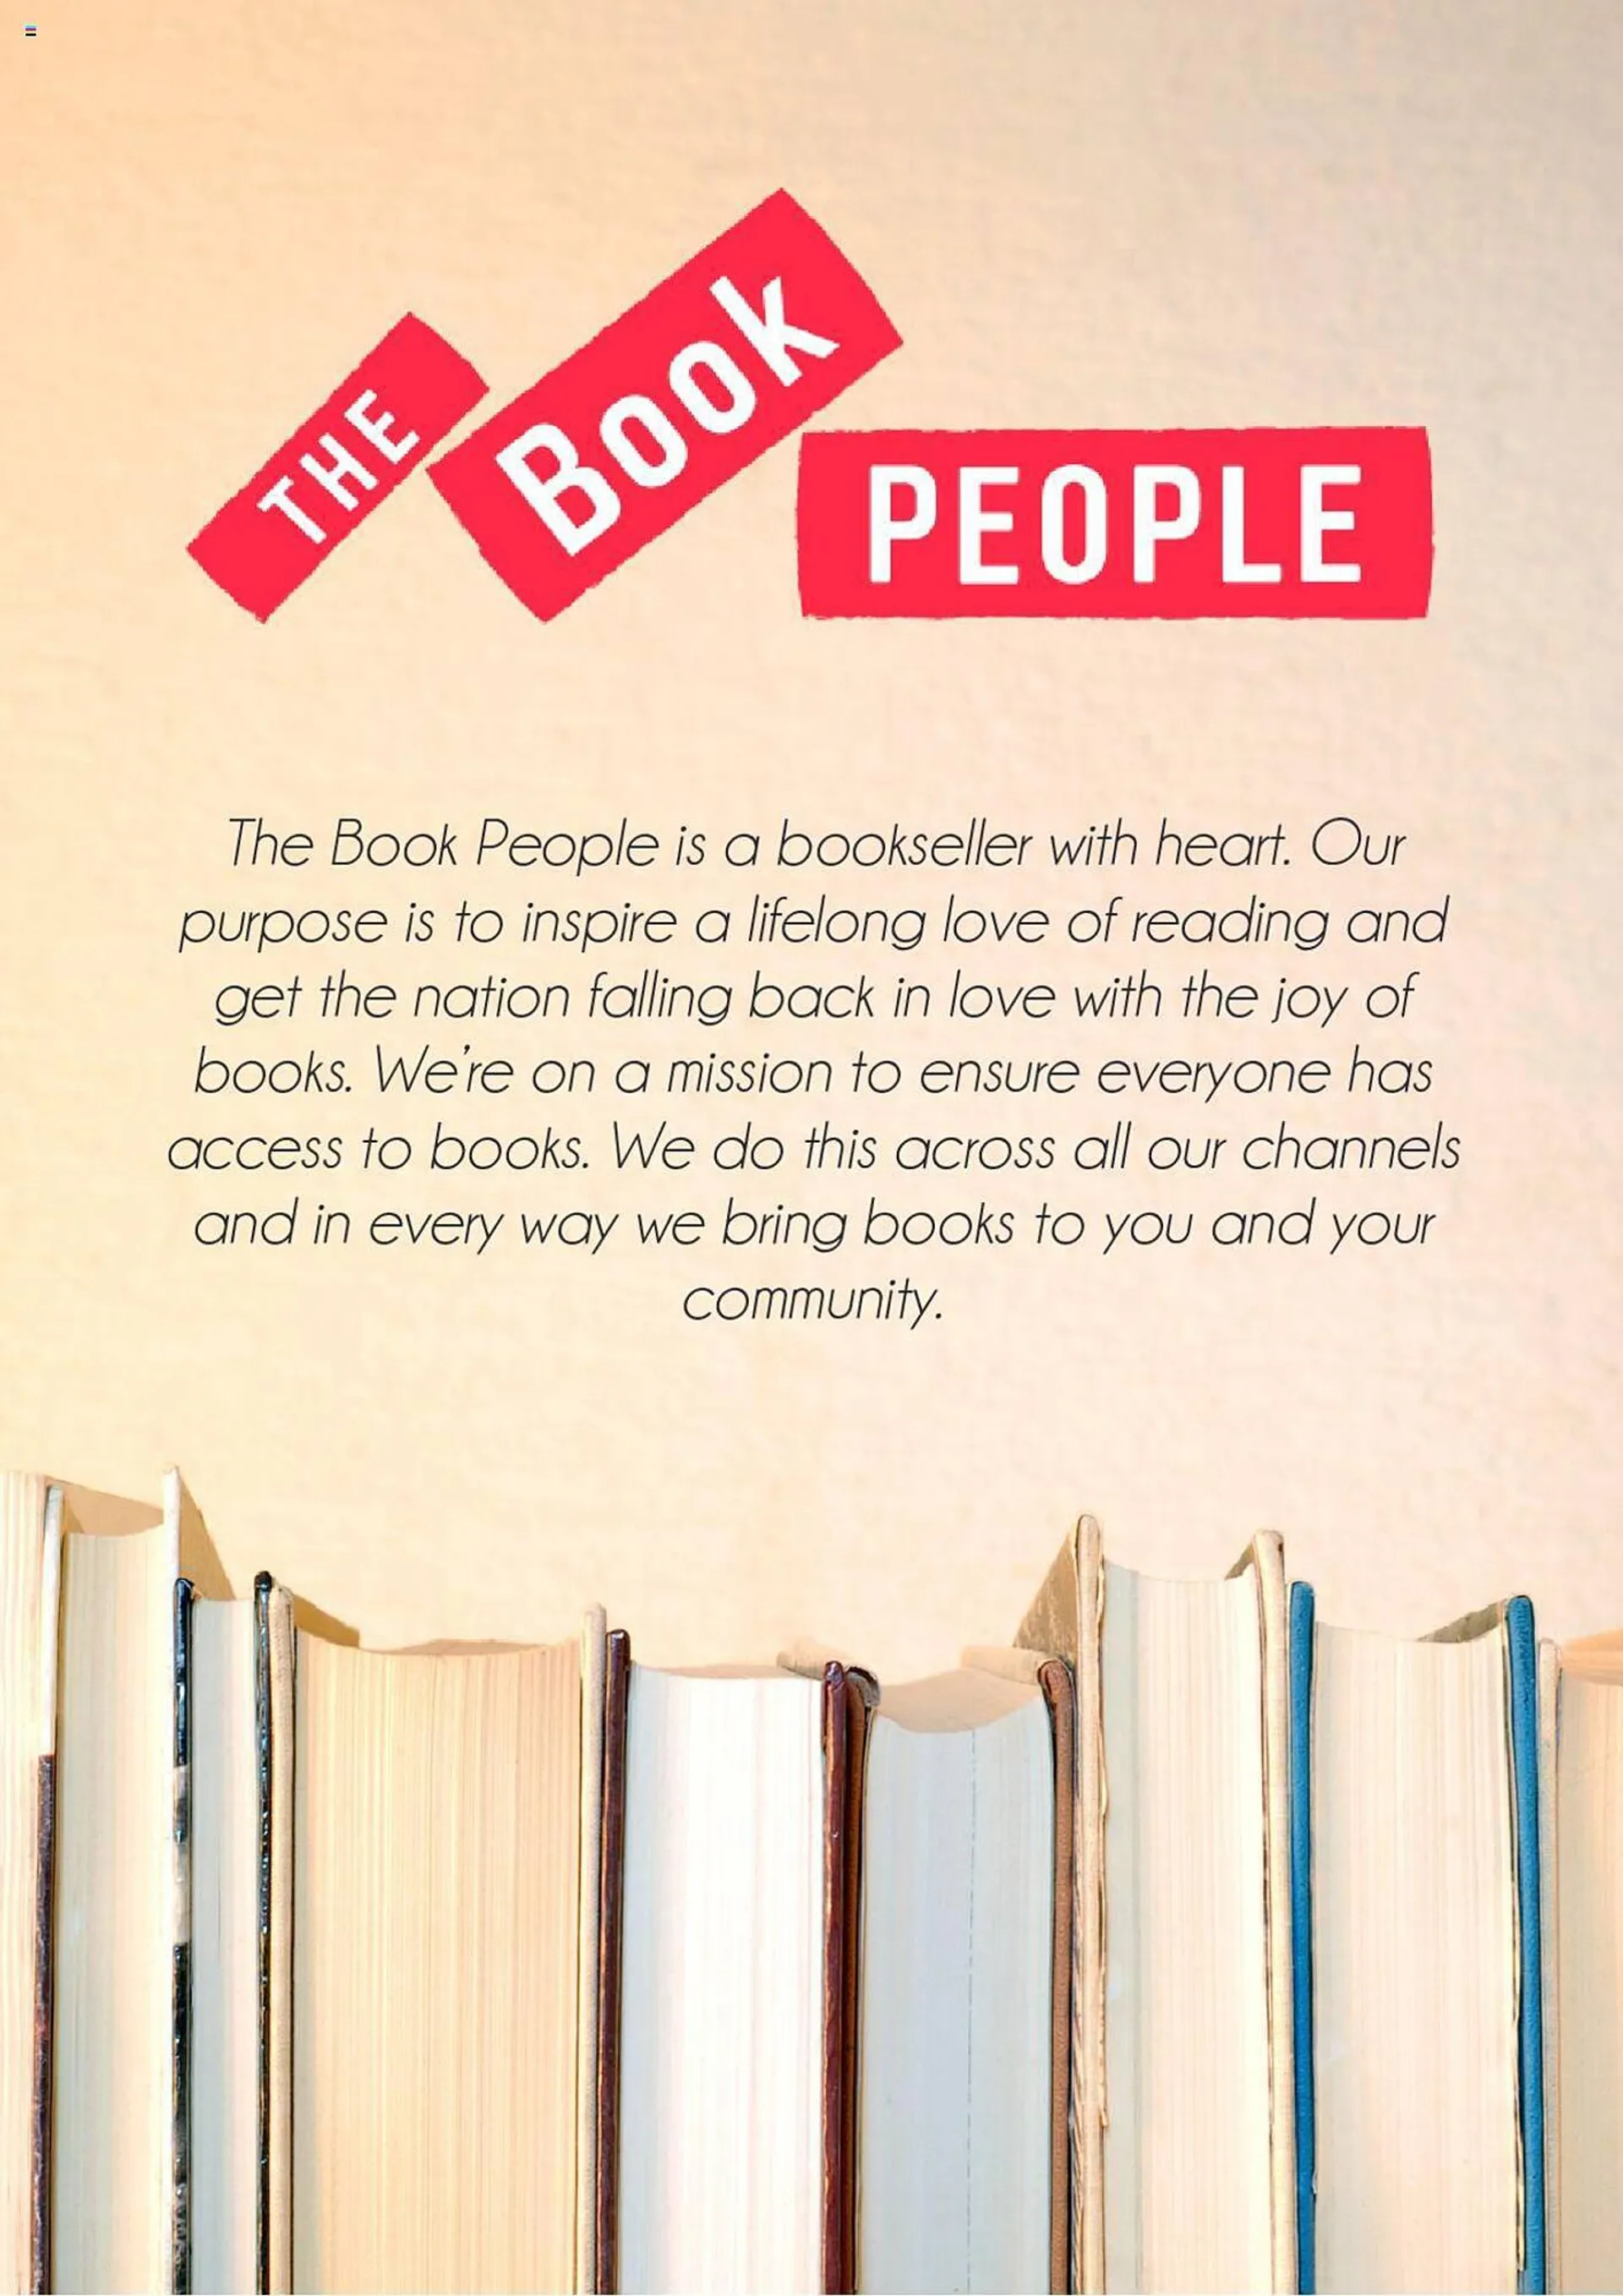 The Book People leaflet